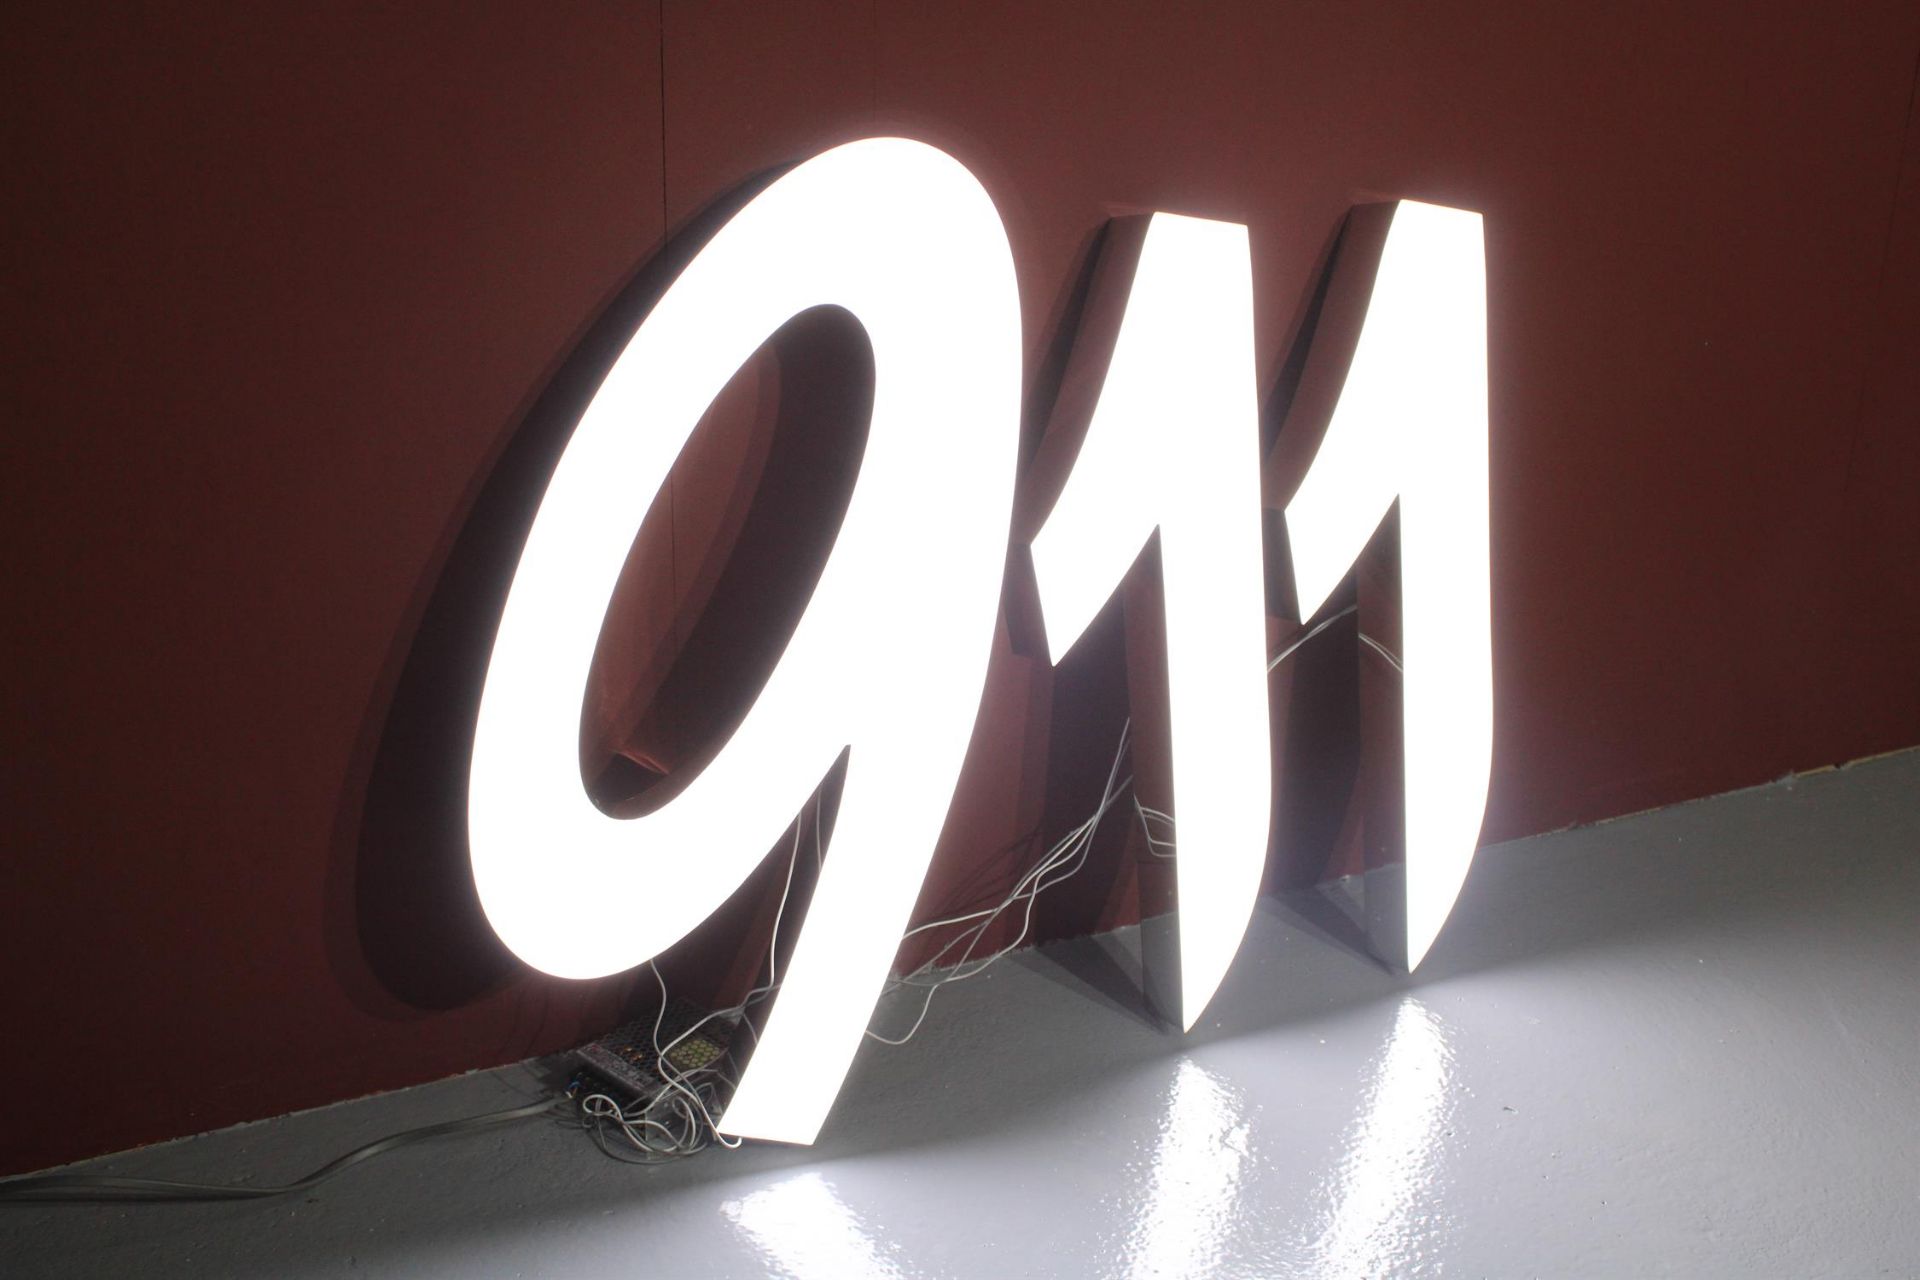 A large Illuminated Sign in the Style of the Porsche Number 911 - Image 2 of 10